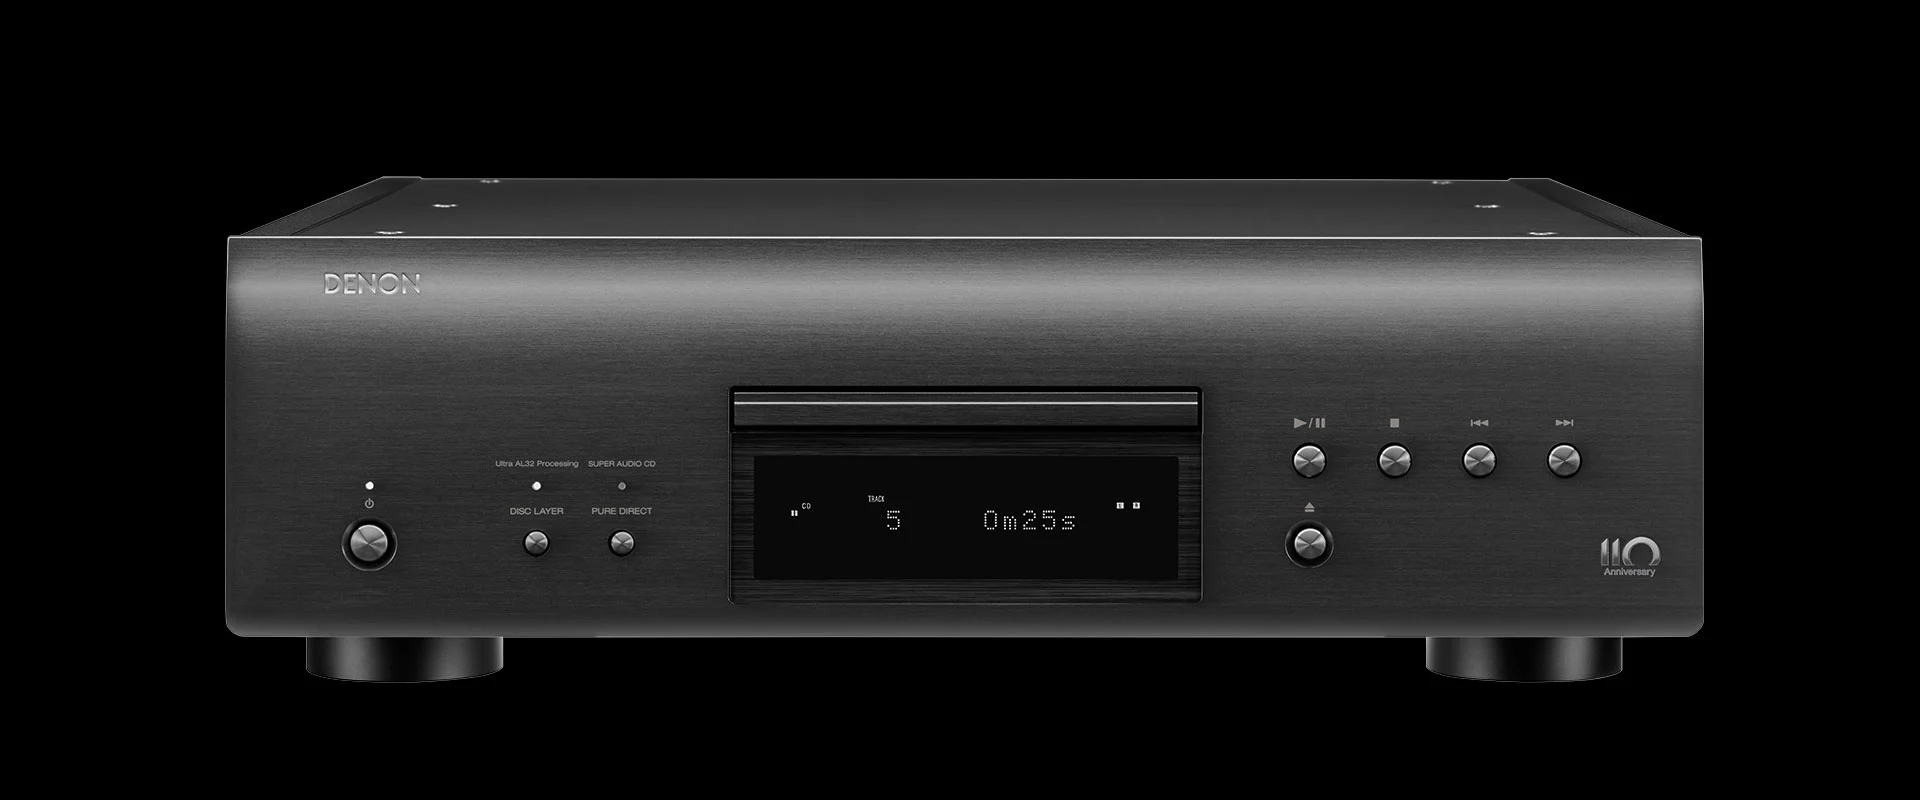 DENON DCD – F107 Specifications and Faults - Unique AV Electronics